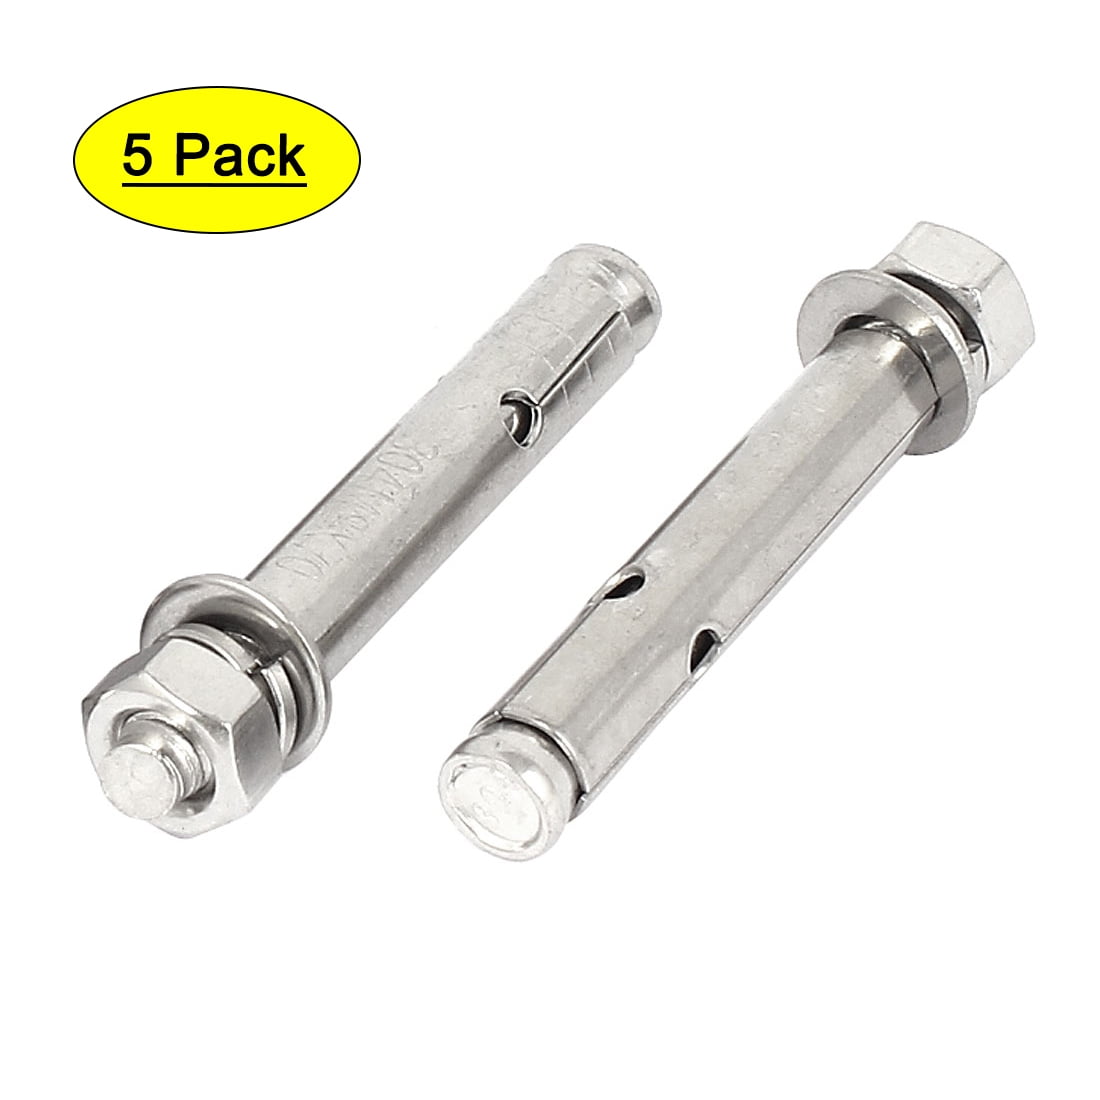 304 Stainless Steel M6 Hex Head Sleeve Anchors Concrete Anchor Bolts Screws Kits 